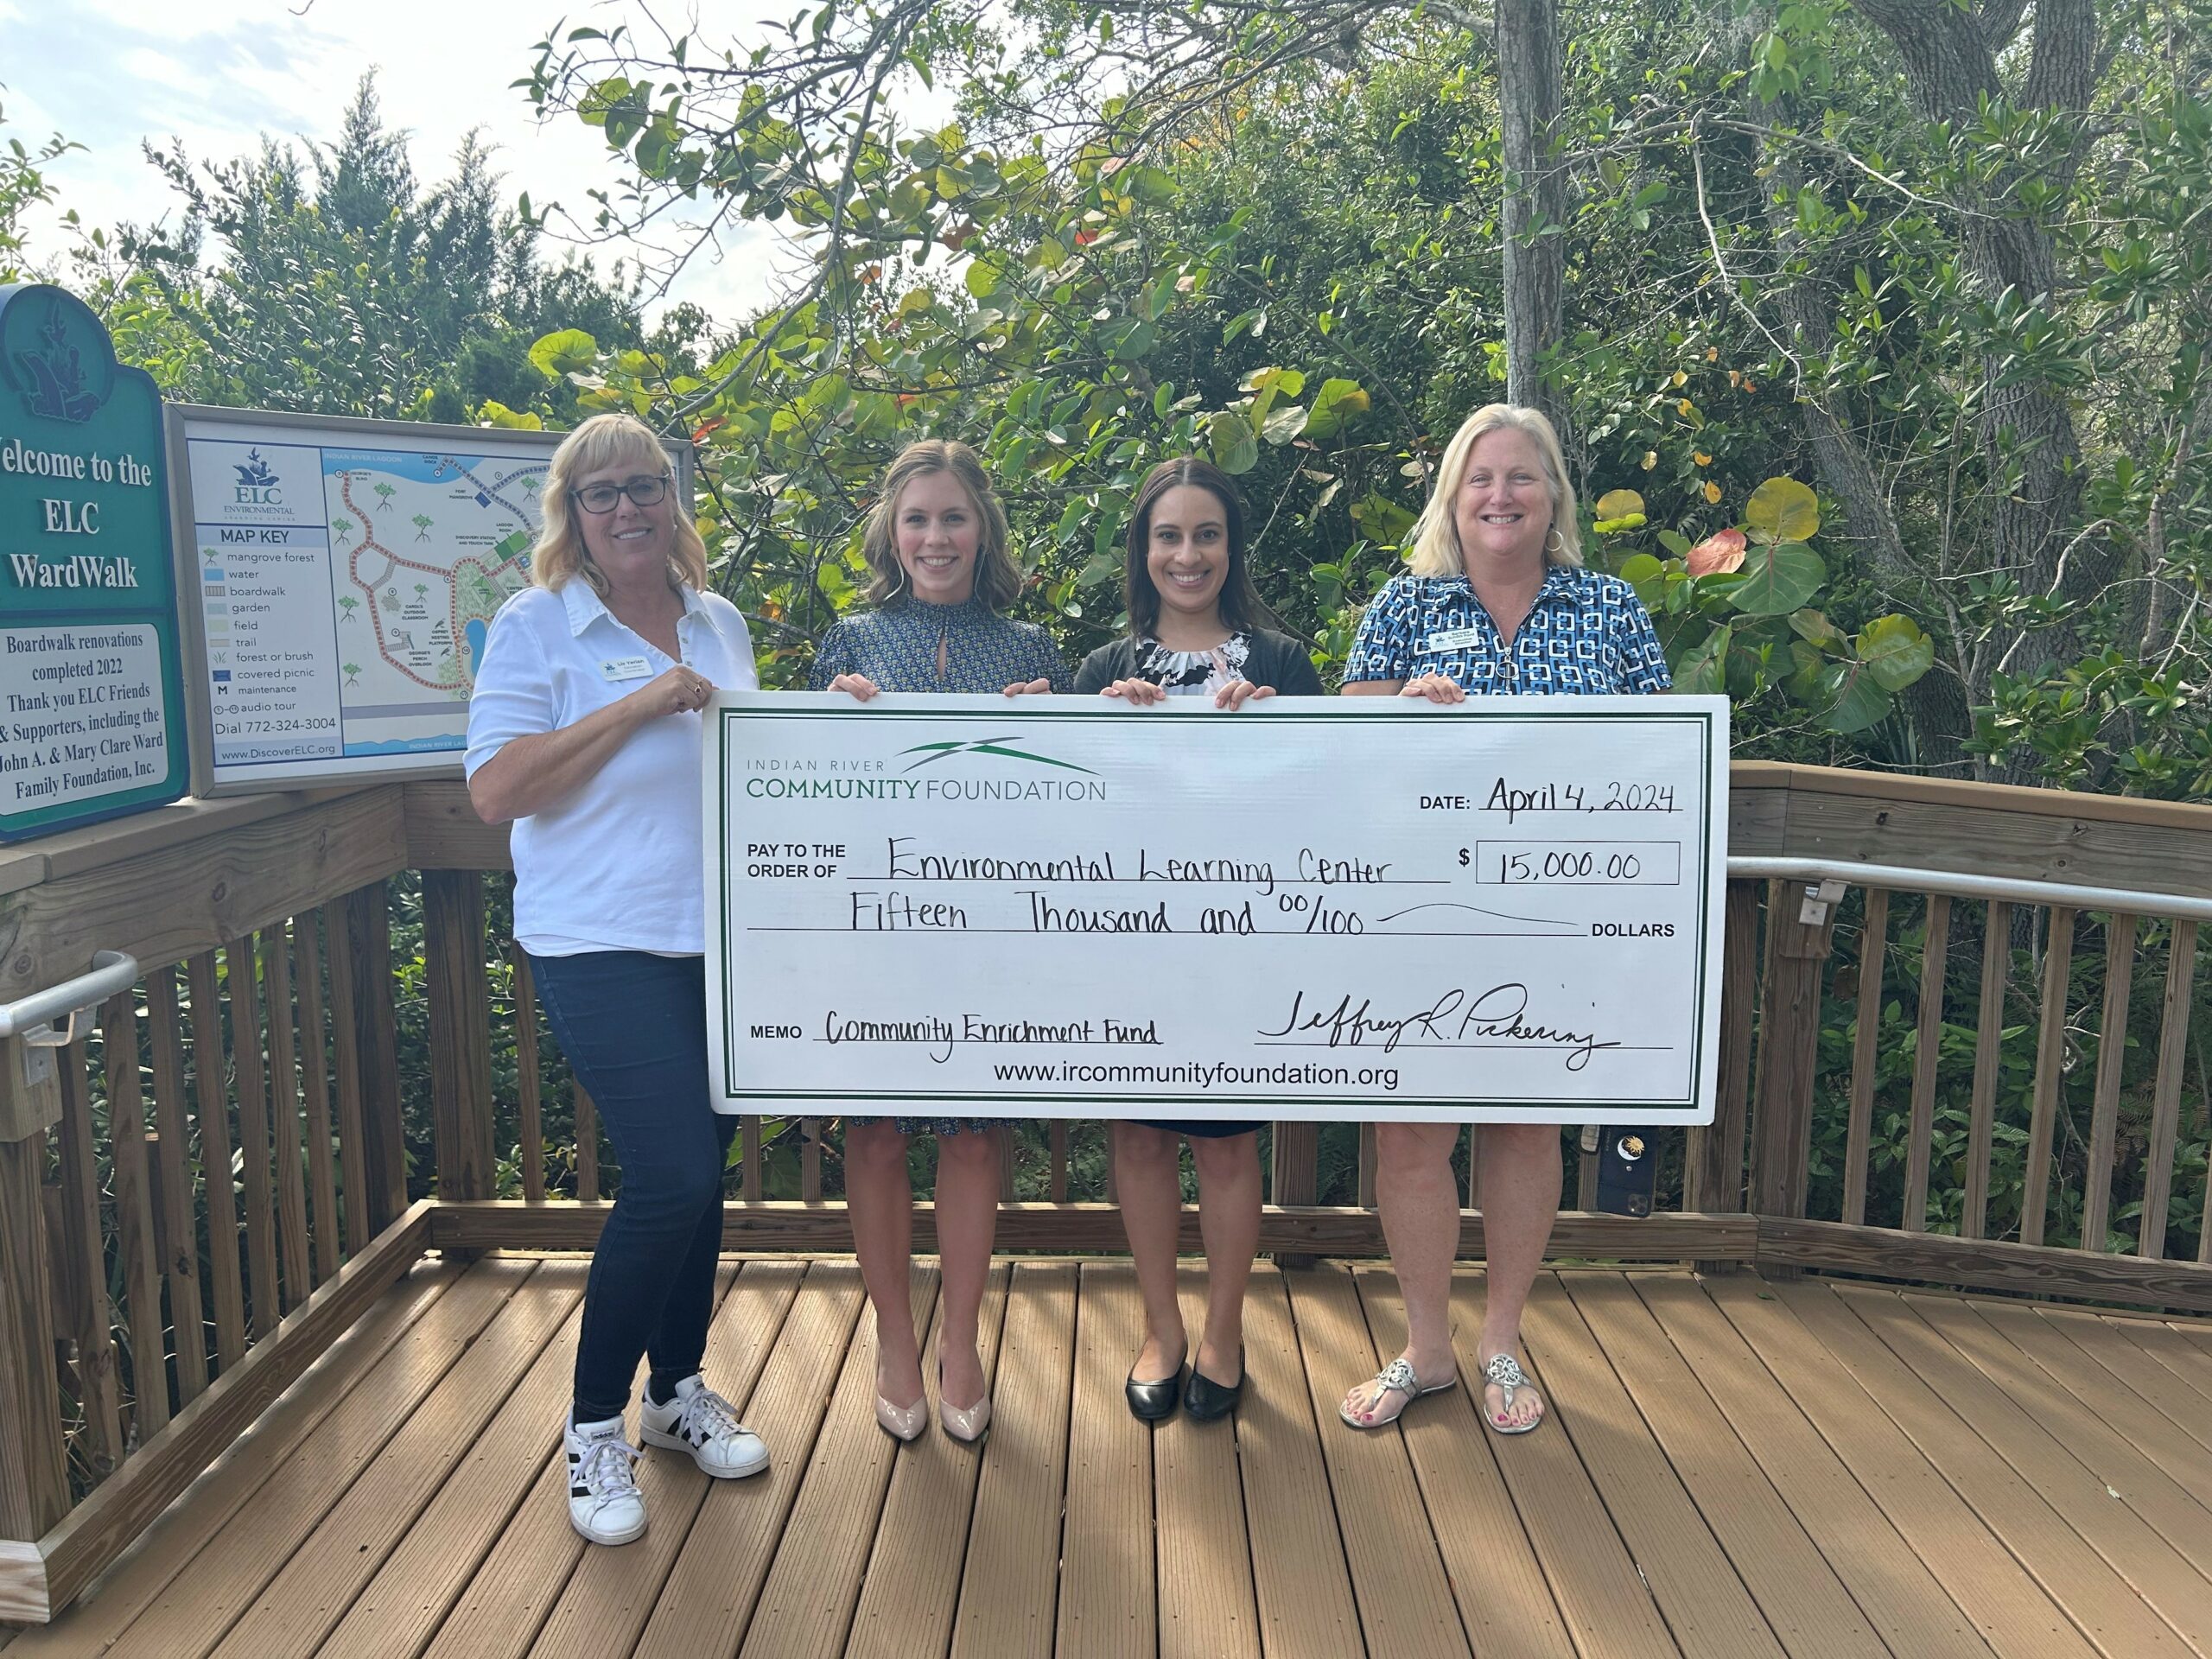 IRCF Awards the Environmental Learning Center $15,000